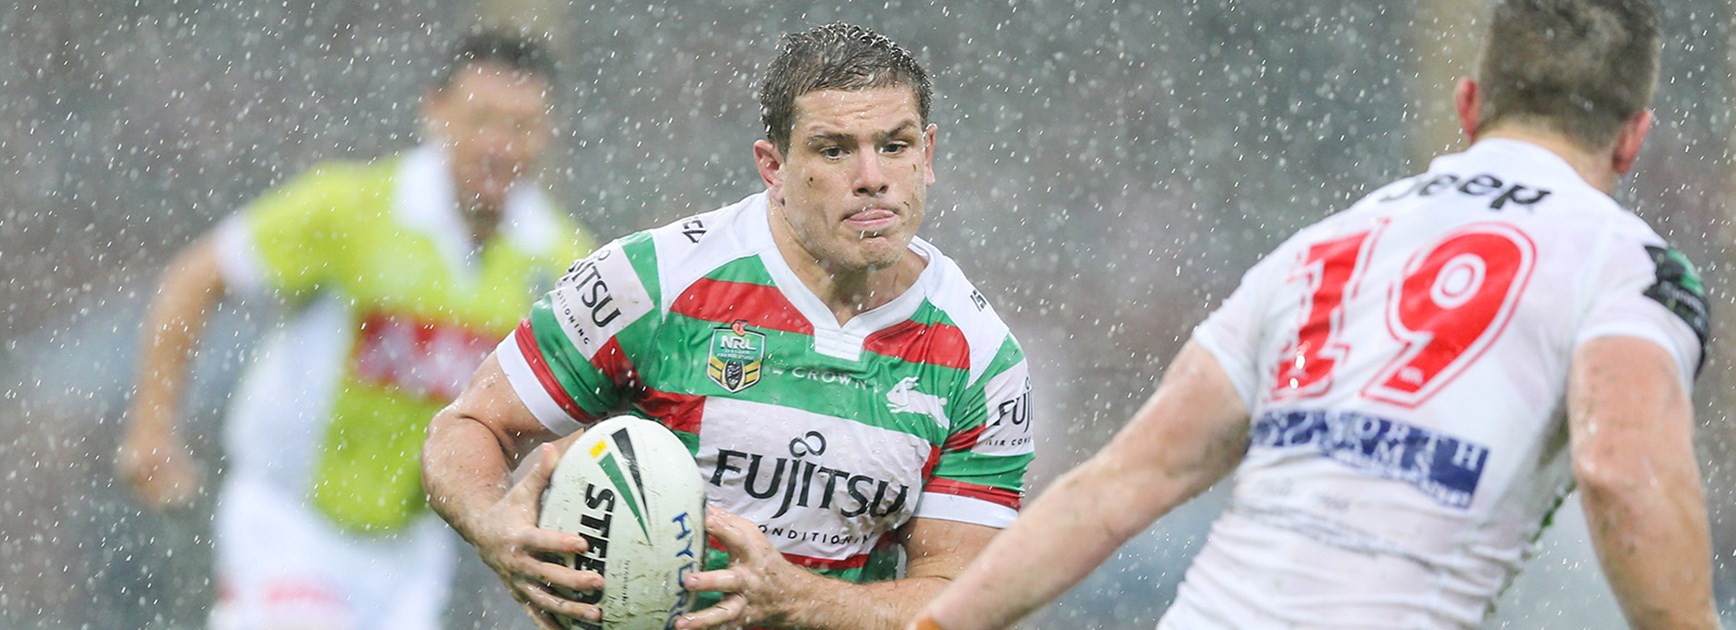 South Sydney forward Paul Carter has been charged by the Match Review Committee after the Round 3 clash with the Dragons.